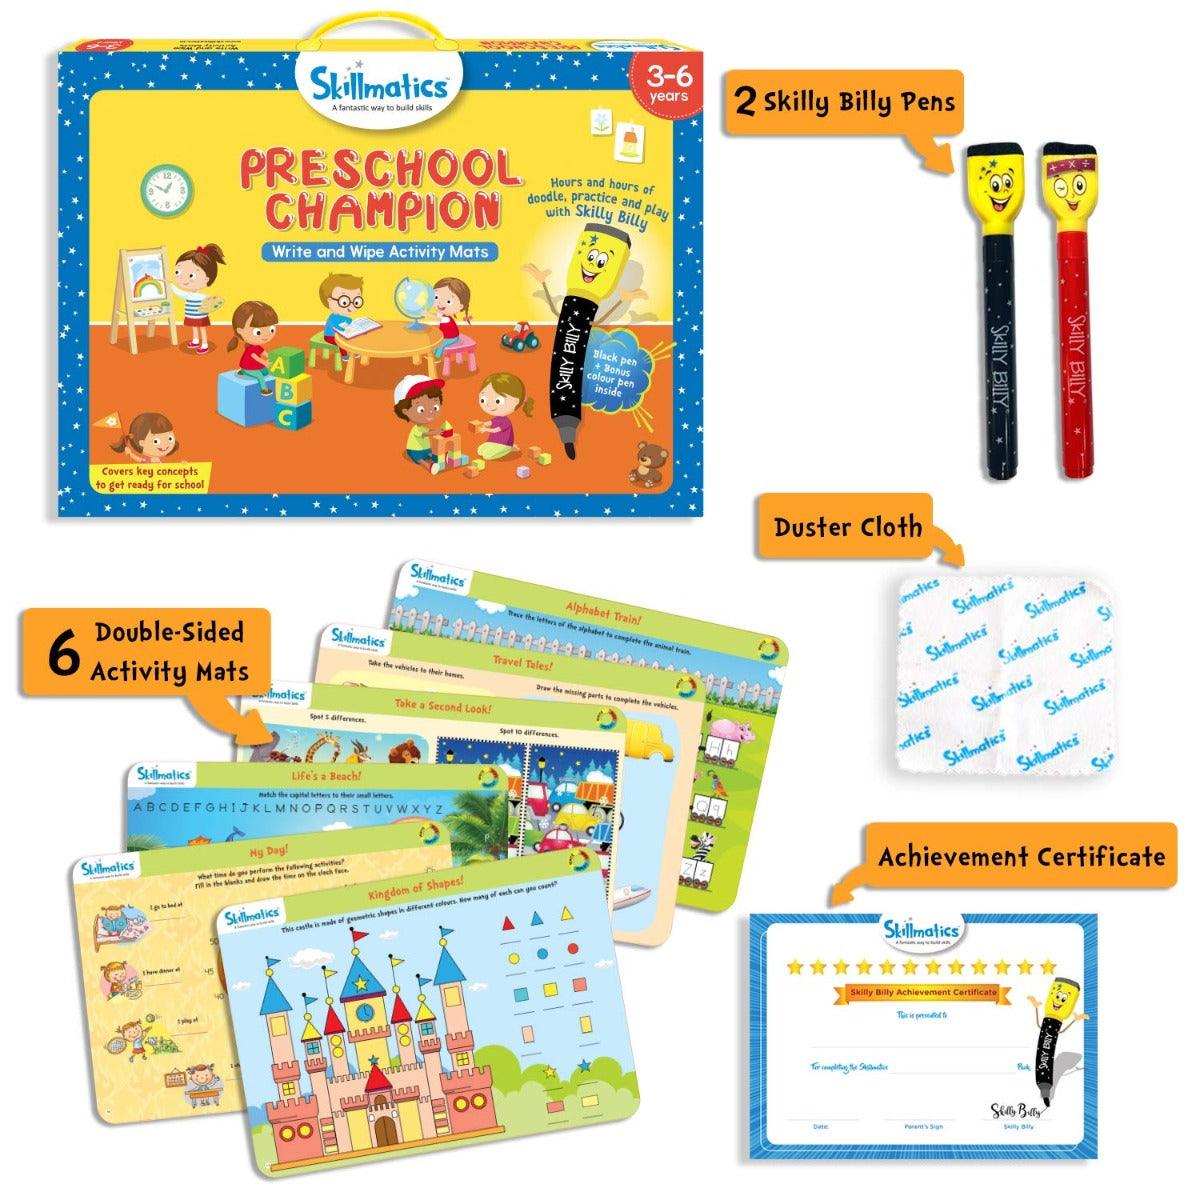 Skillmatics Educational Game: Preschool Champion (3-6 Years) | Creative Fun Activities and Games for Kids | Erasable and Reusable Mats